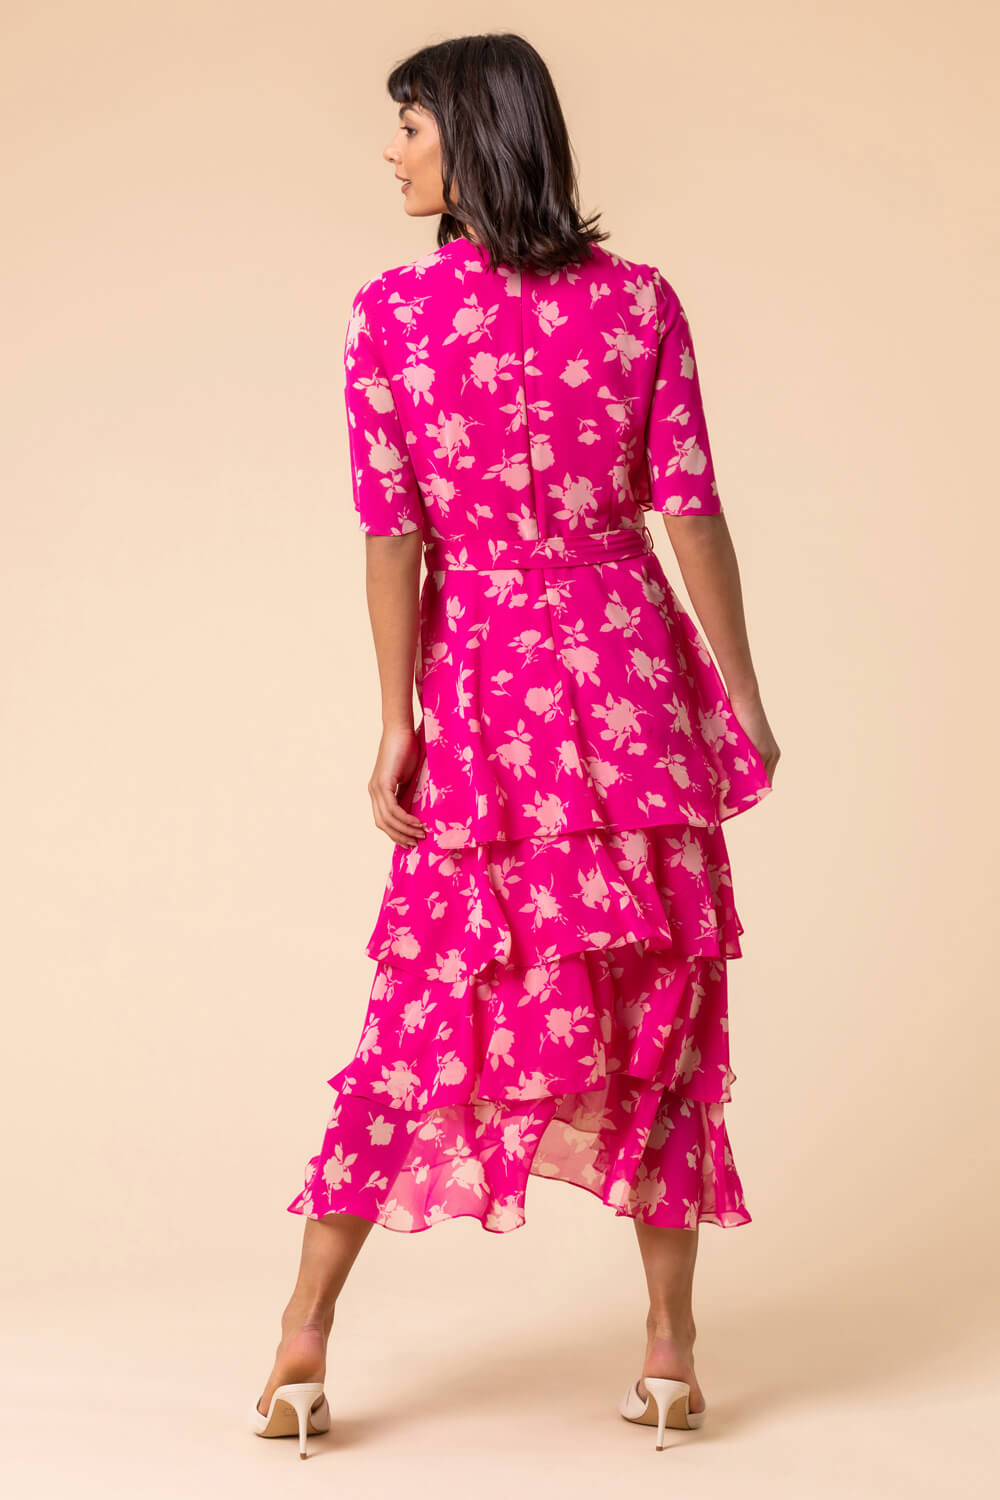 PINK Floral Print Tiered Frill Midi Dress, Image 2 of 5